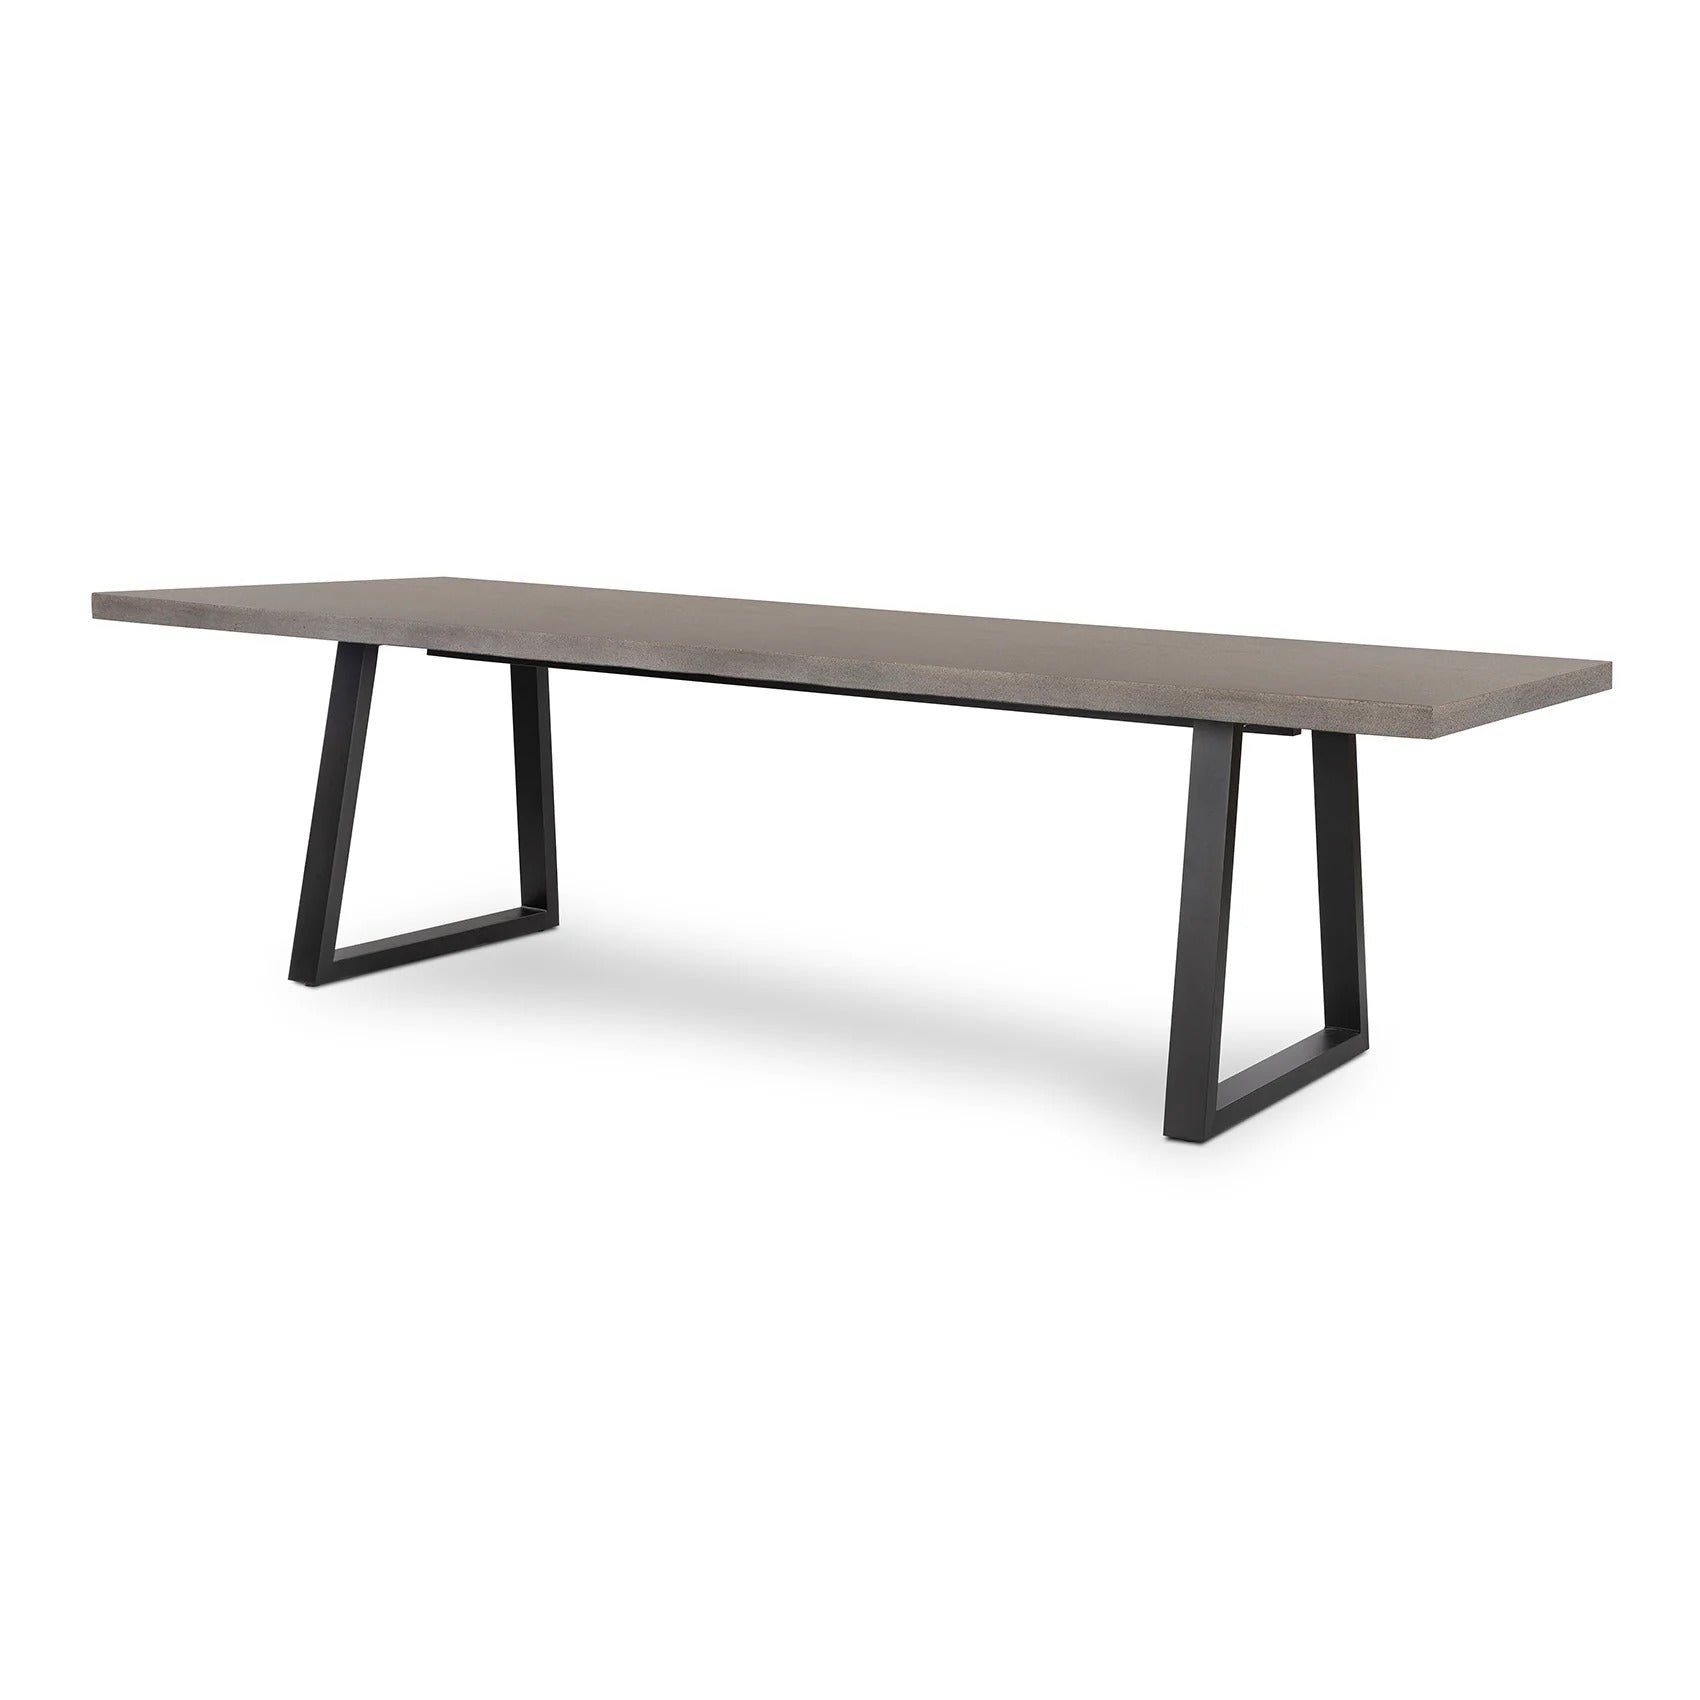 Sierra Rectangular Dining Table (Speckled Grey with Black Metal Legs).